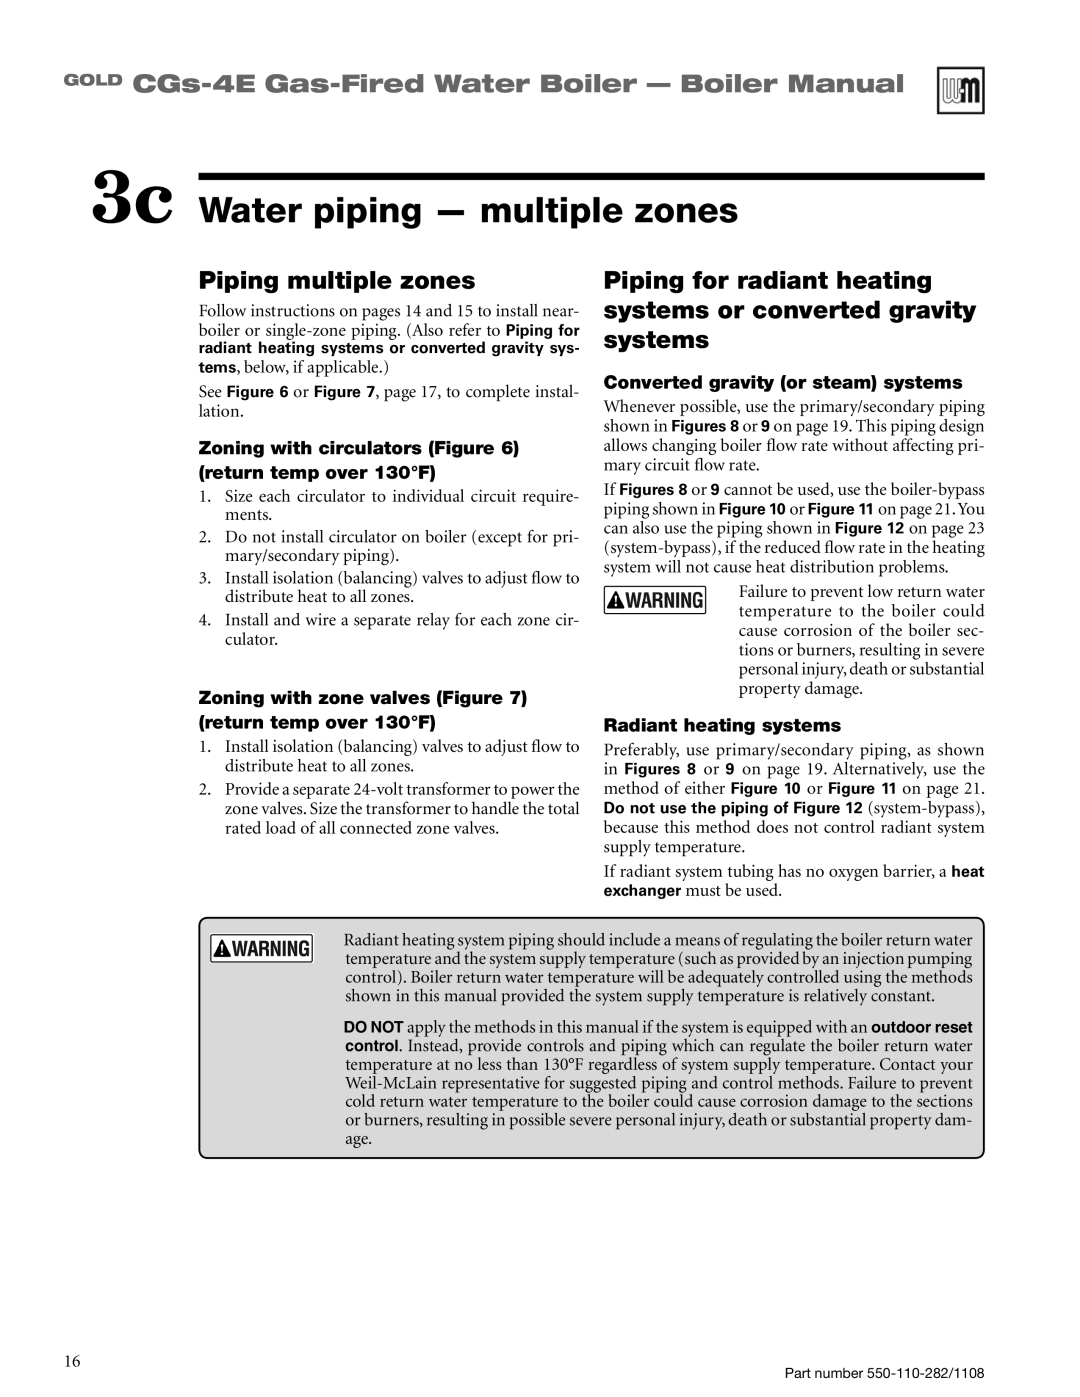 Weil-McLain CGS-4E manual 3c Water piping - multiple zones, Piping multiple zones, Converted gravity or steam systems 